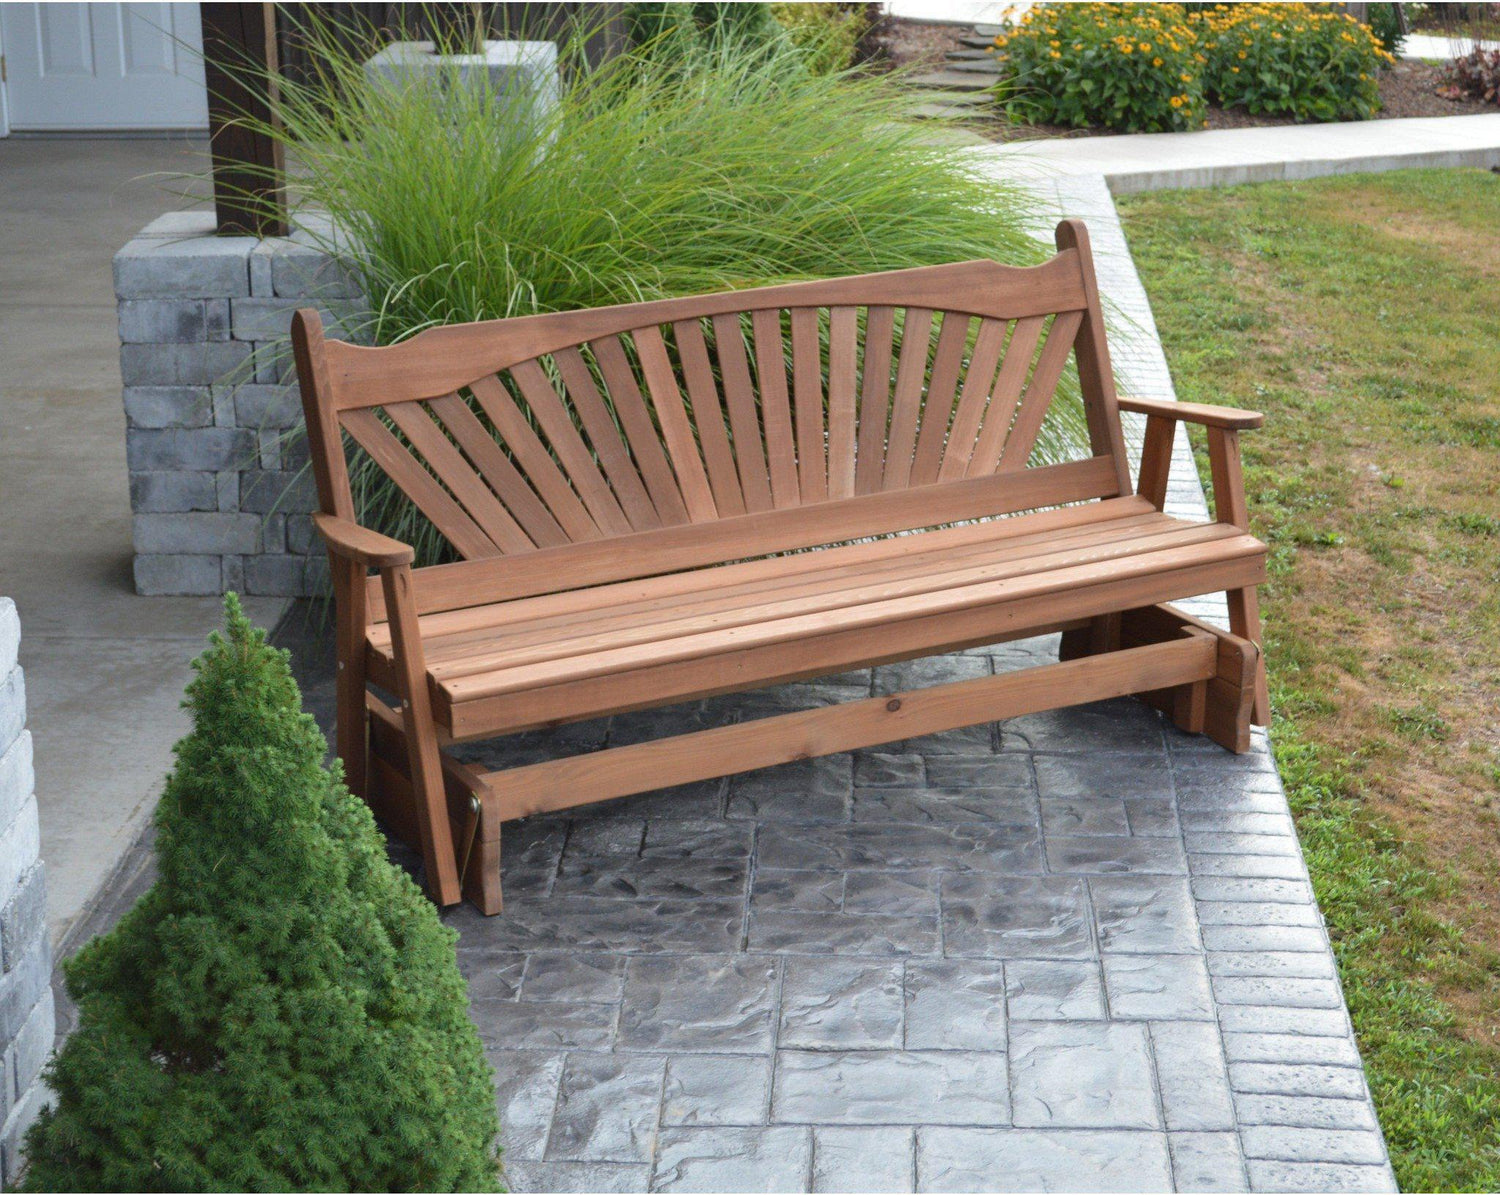 6' Outdoor Patio Glider Benches